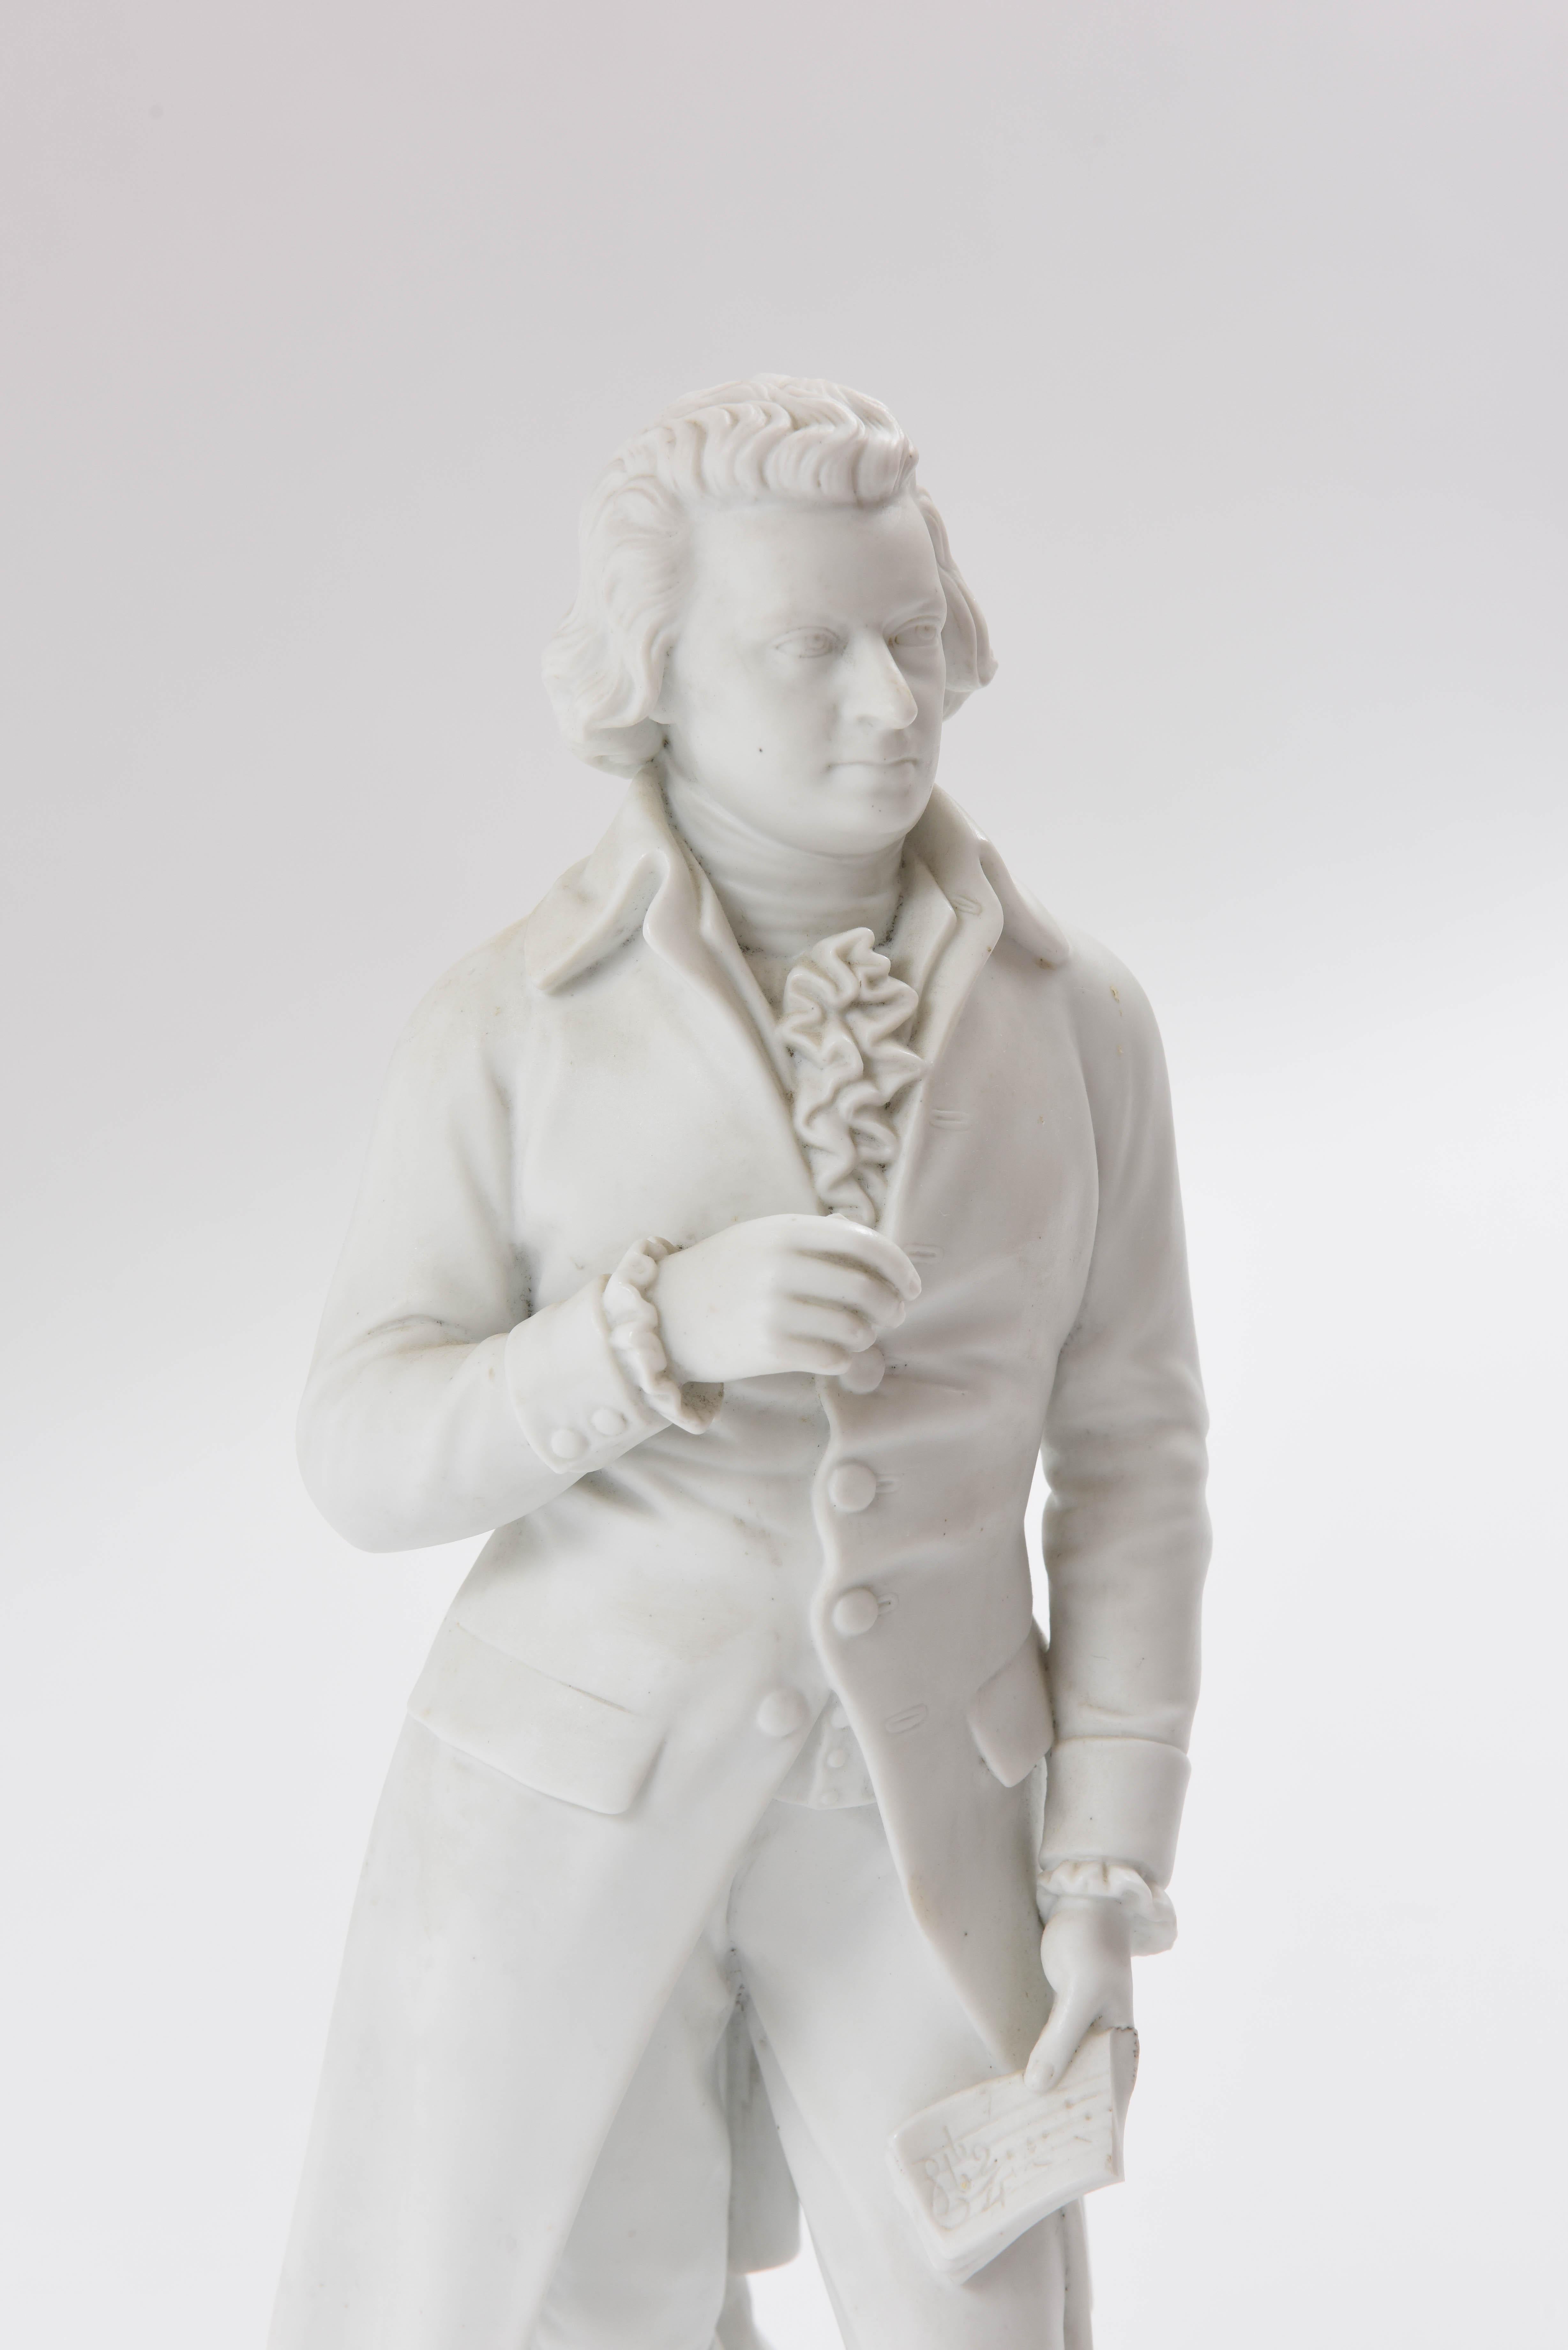 English Mozart White Parian Figure, 19th Century, Tall and Regal